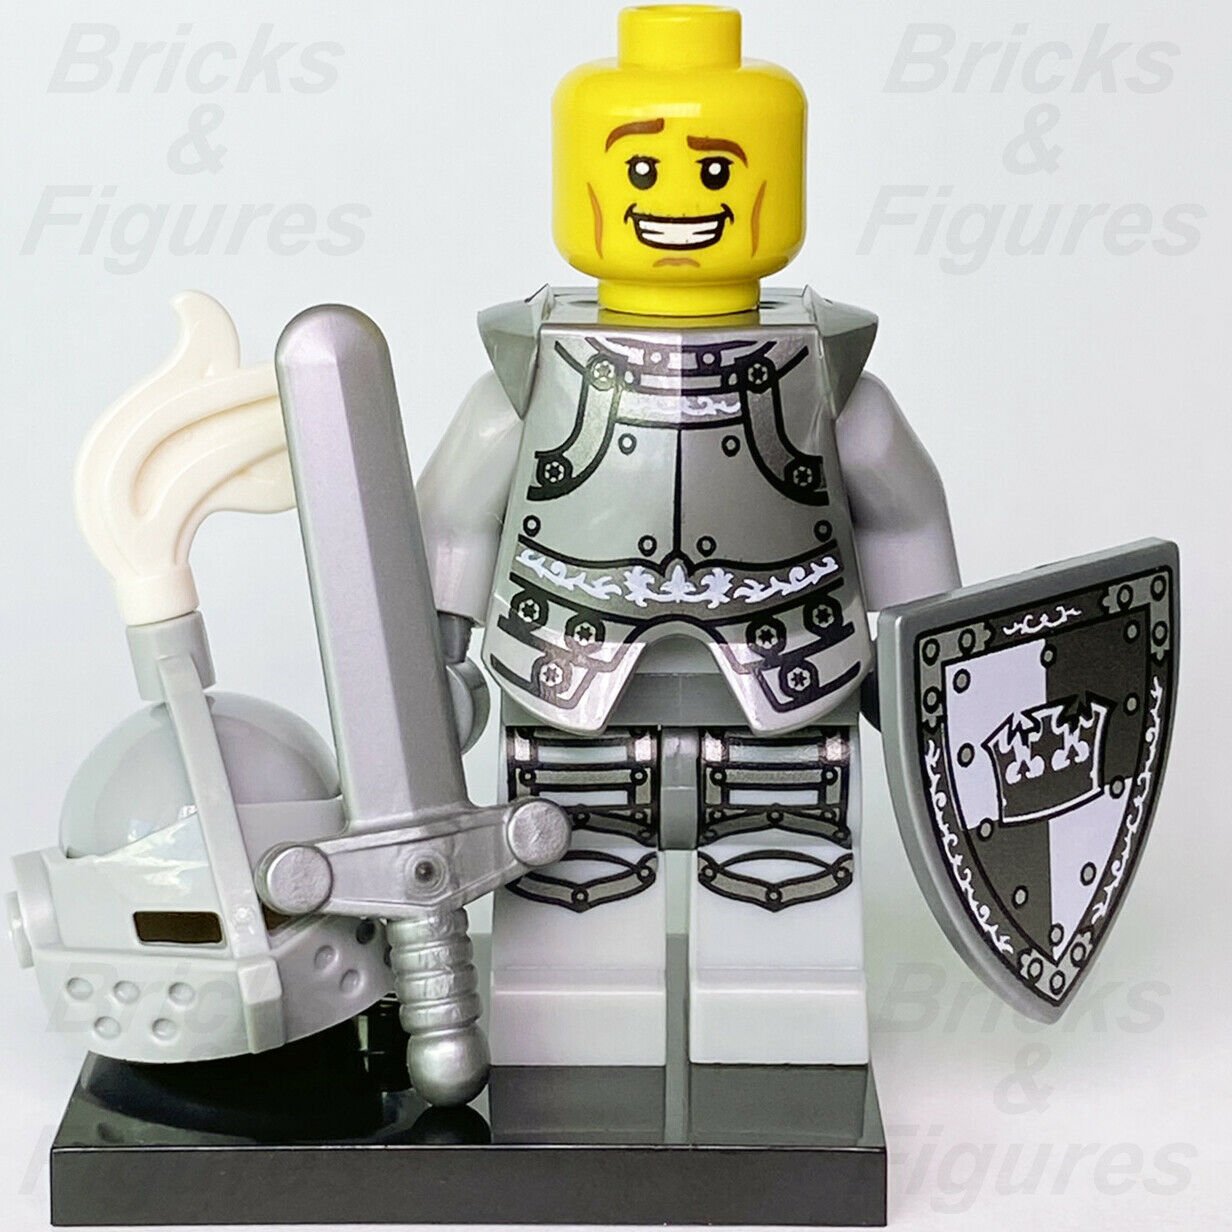 New Collectible Minifigures LEGO Heroic Knight Series 9 Minifig 71000 col09-4 - Bricks & Figures